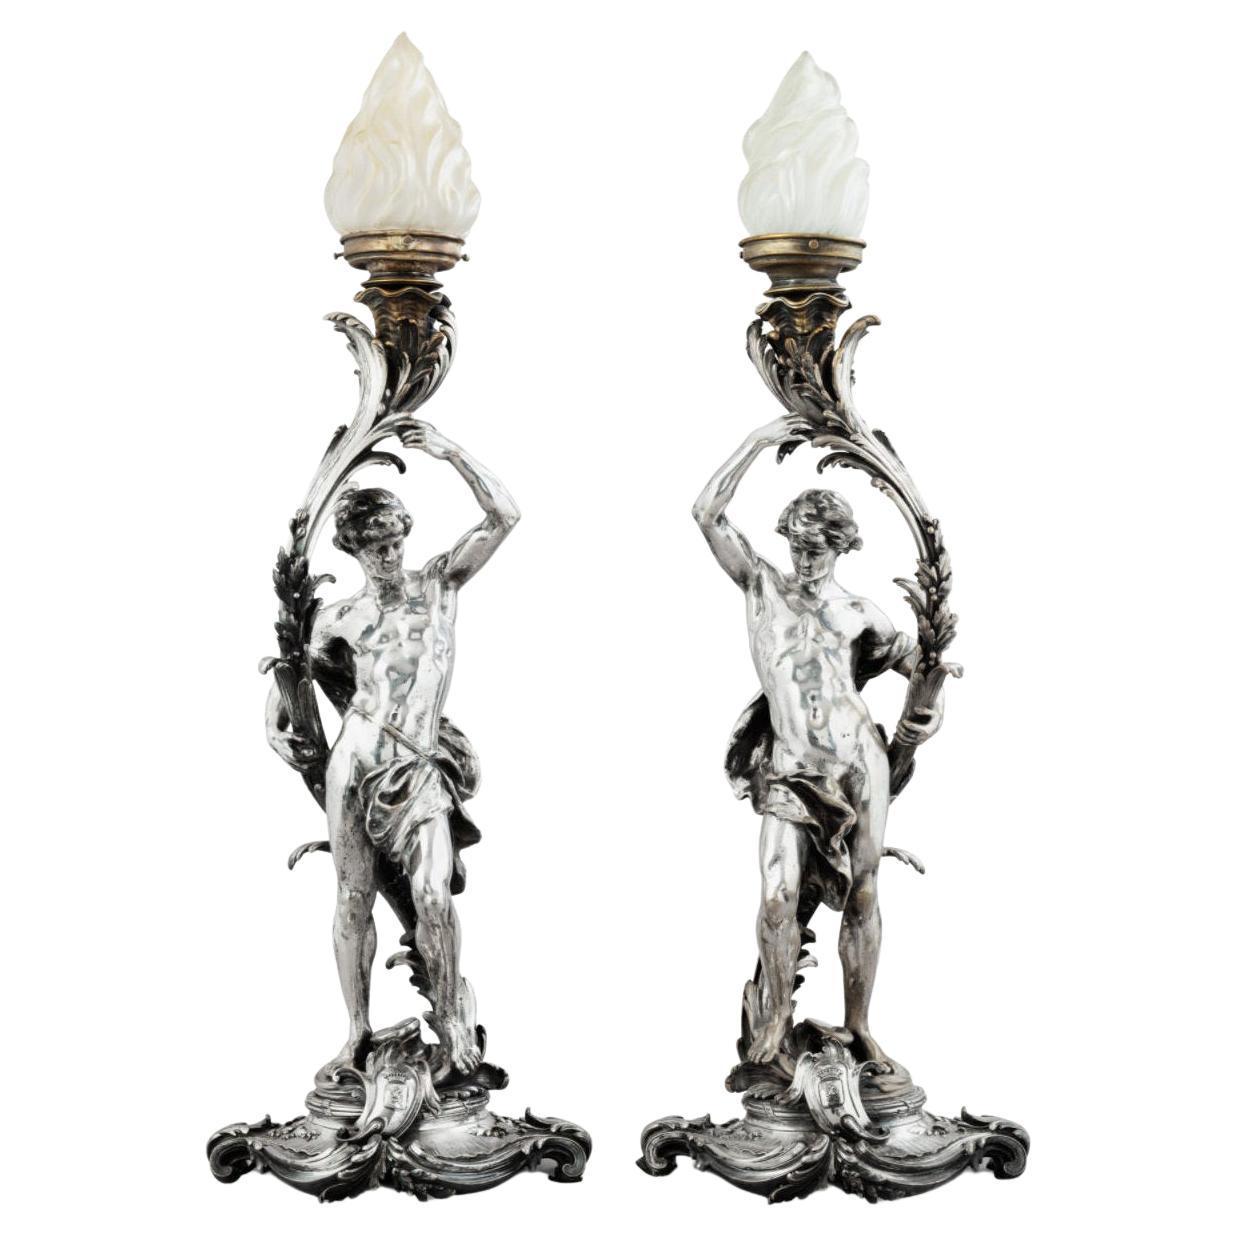 Christofle Silverplated Bronze Lamps with Royal Provenance